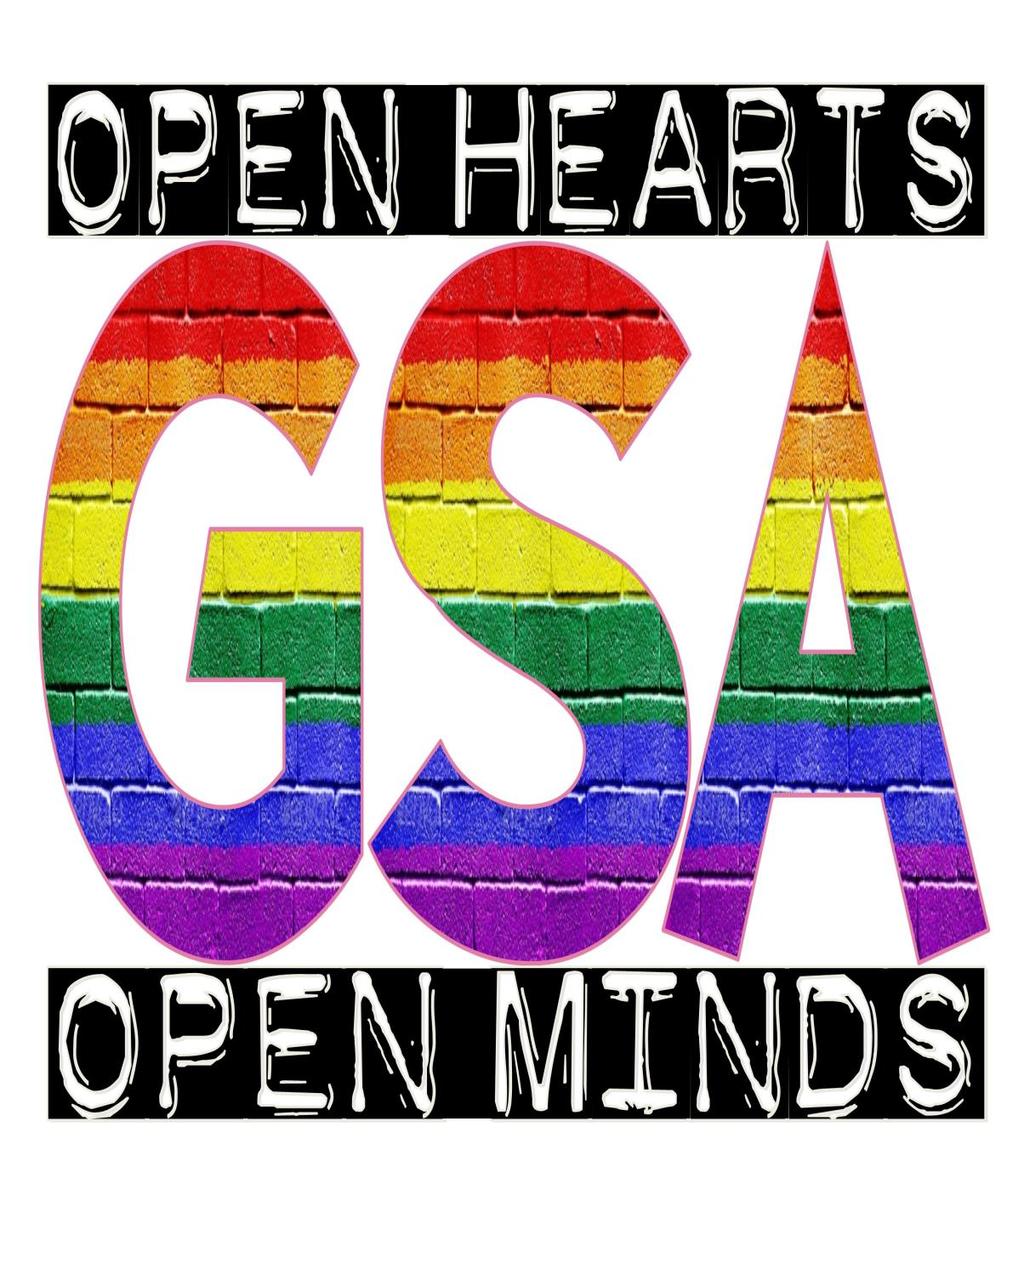 GSA will have a meeting on Thursday, April 11 2:15pm